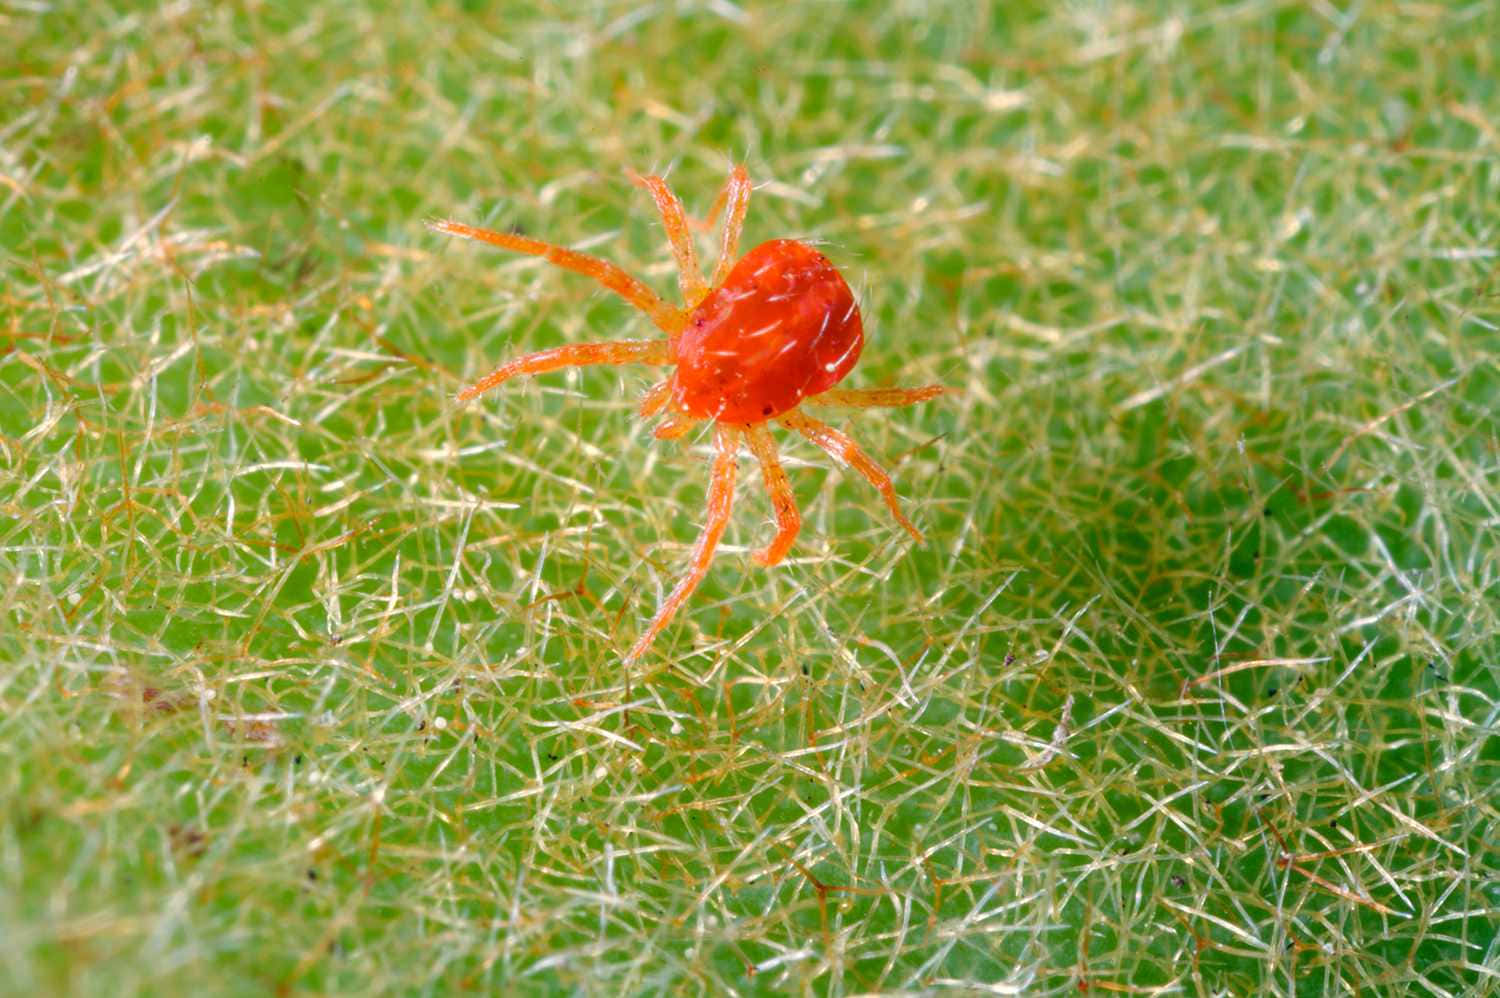 Vibrant Red Spider on a Green Leaf Wallpaper